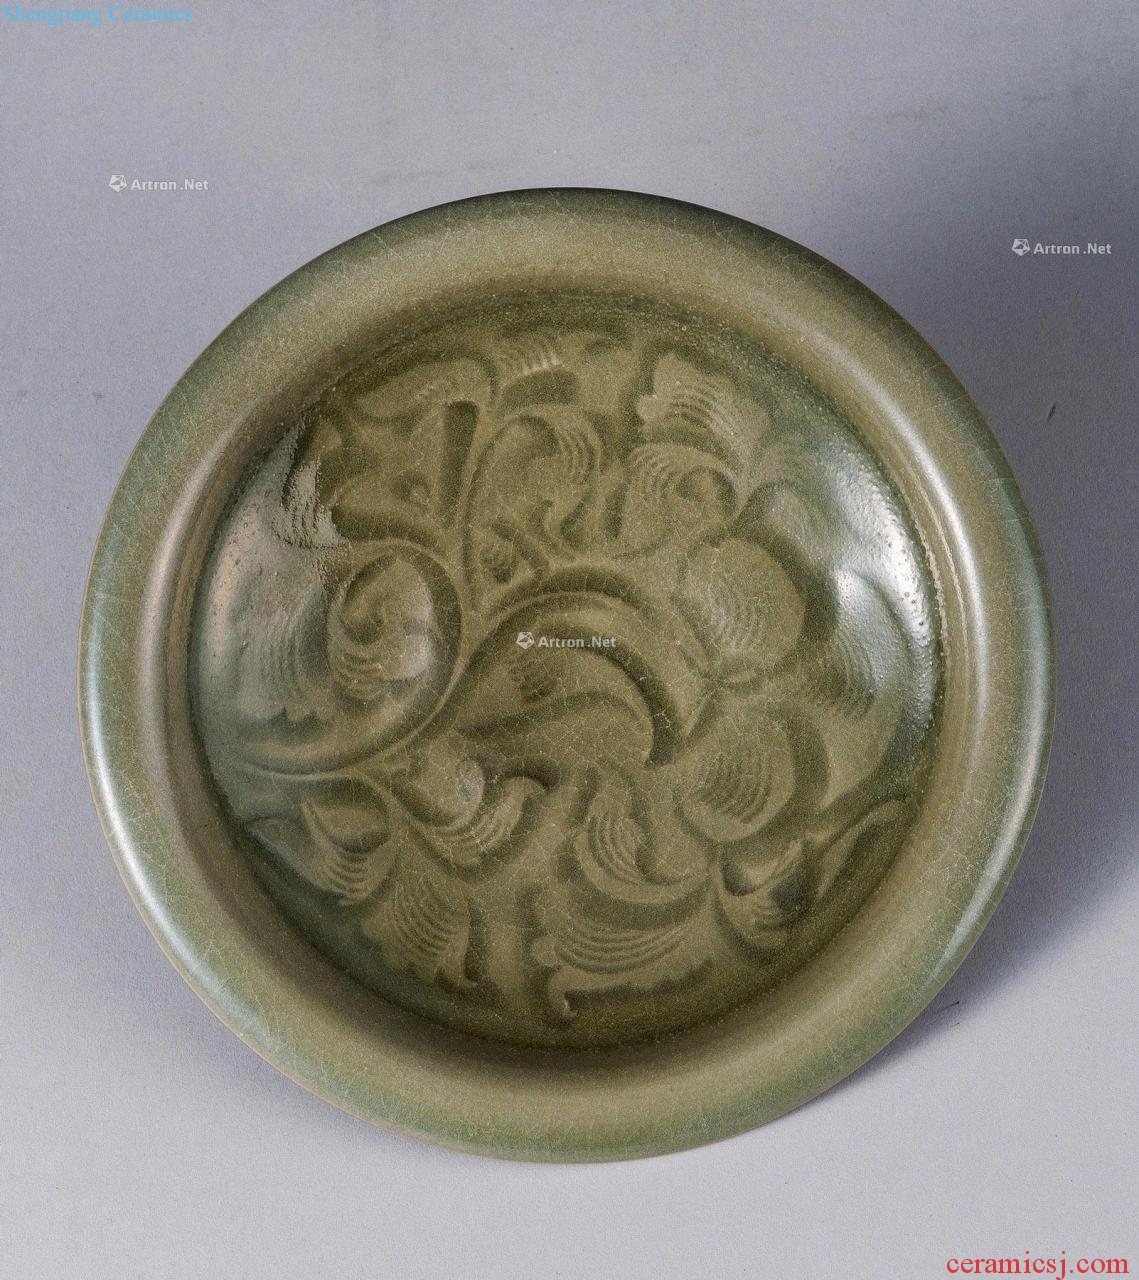 Northern song dynasty Yao state kiln carved plate